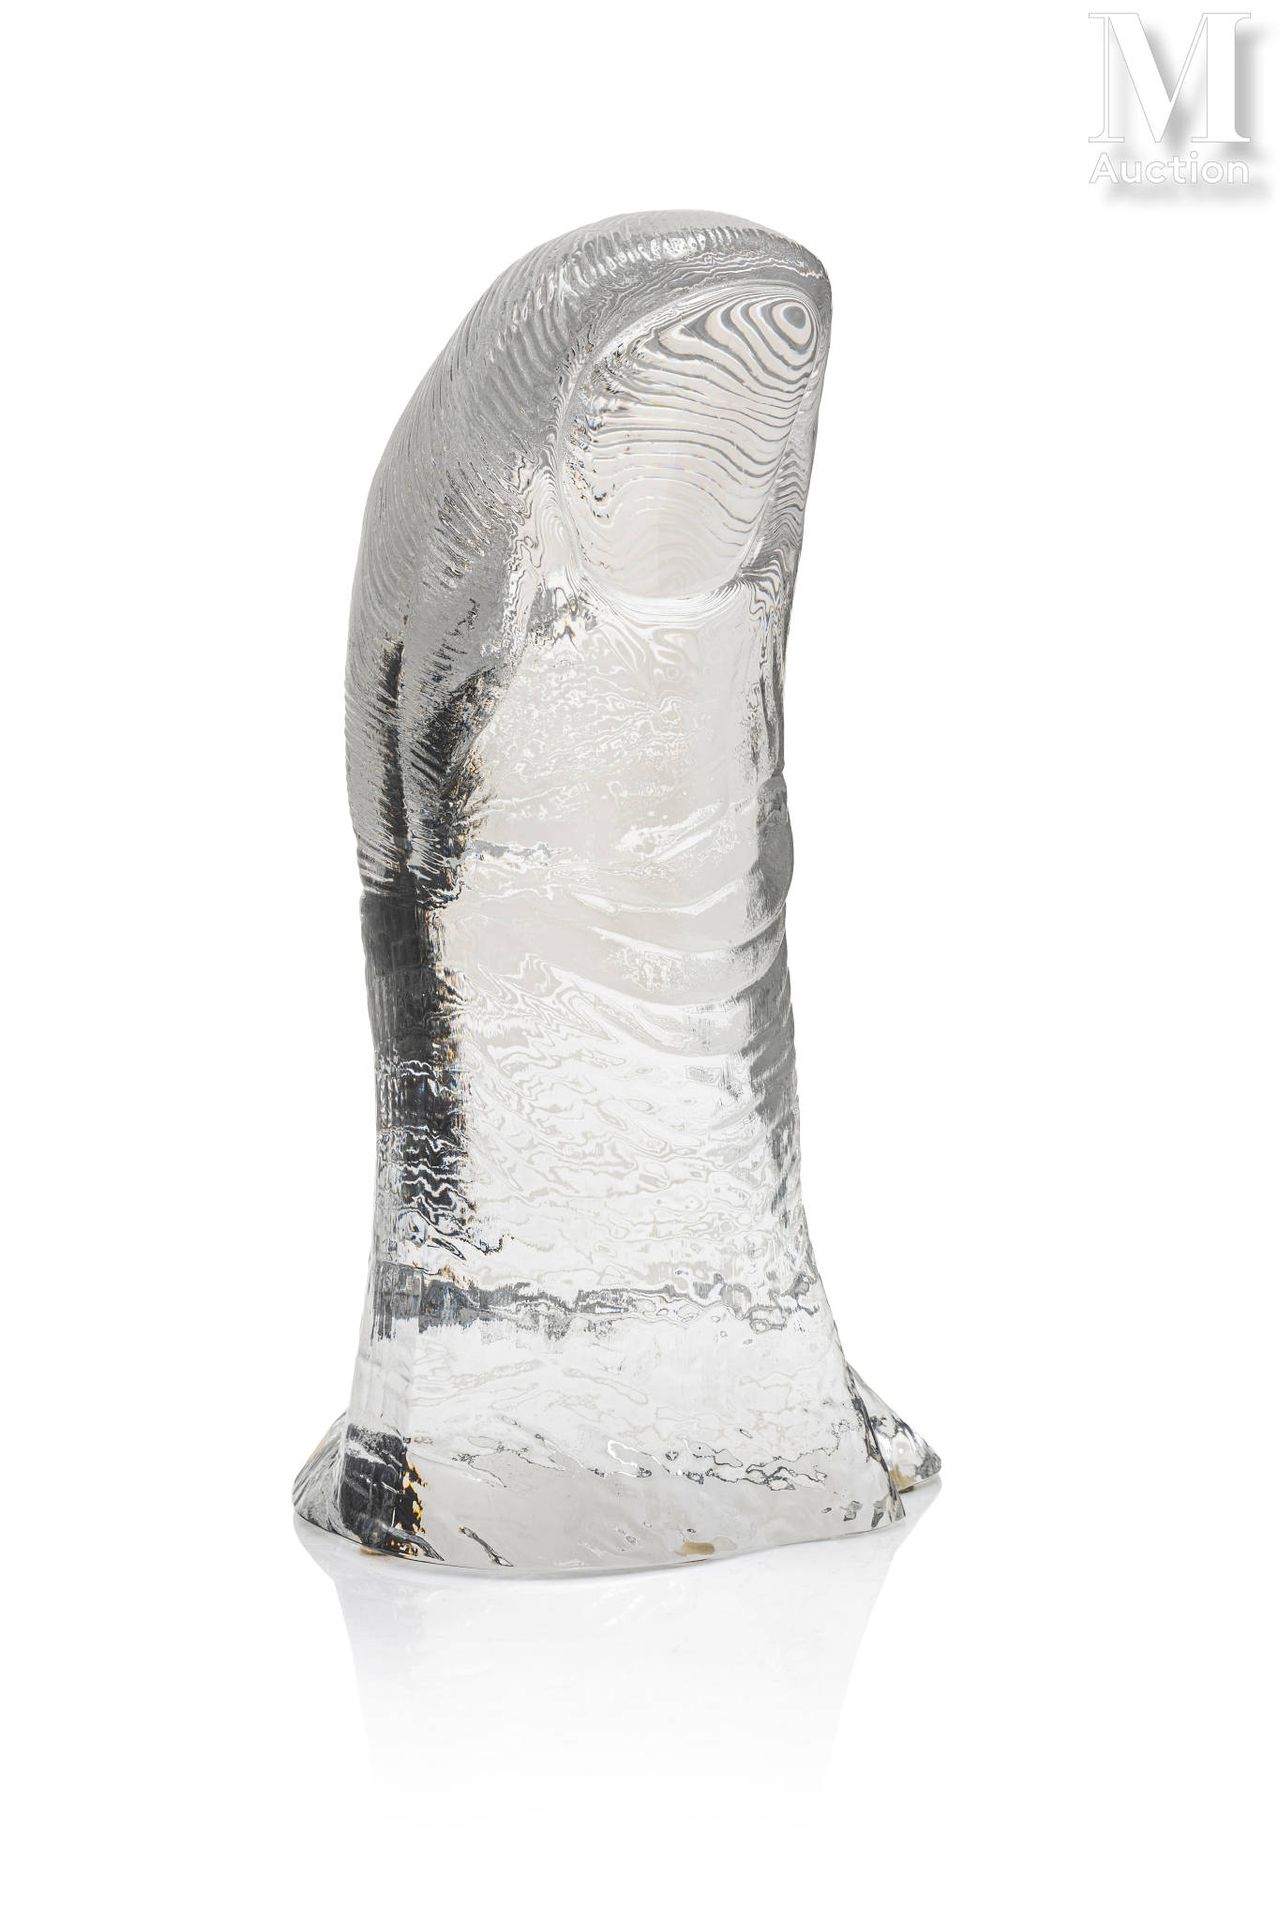 César (1921-1998) The Thumb, 1975

Crystal, sculpture signed, numbered 64/300 an&hellip;